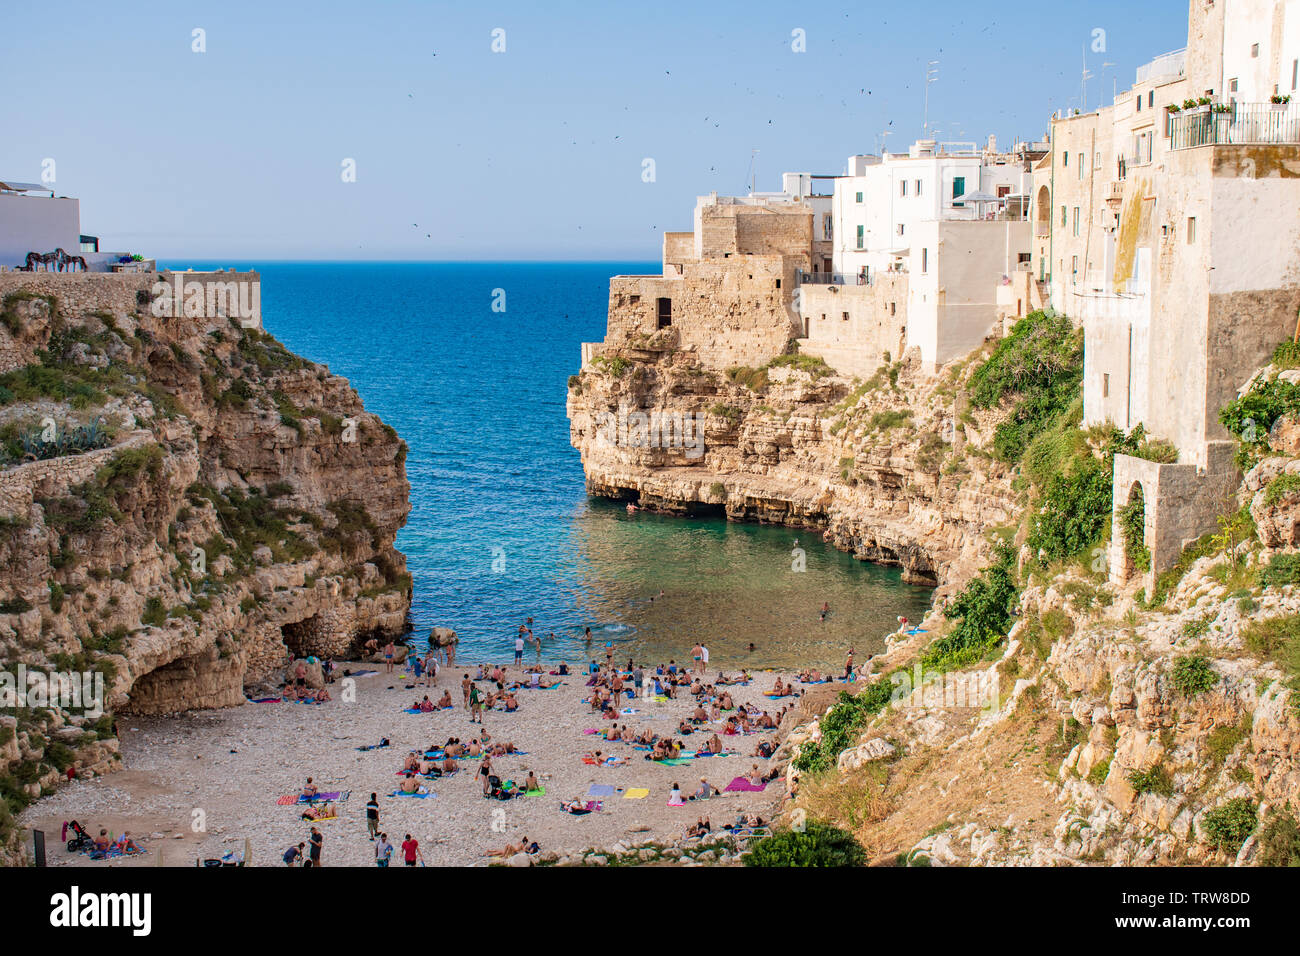 Panoramic city skyline with white houses and beach, town on the rocks, Puglia region, Italy, Europe. Traveling concept background with blue sea Stock Photo